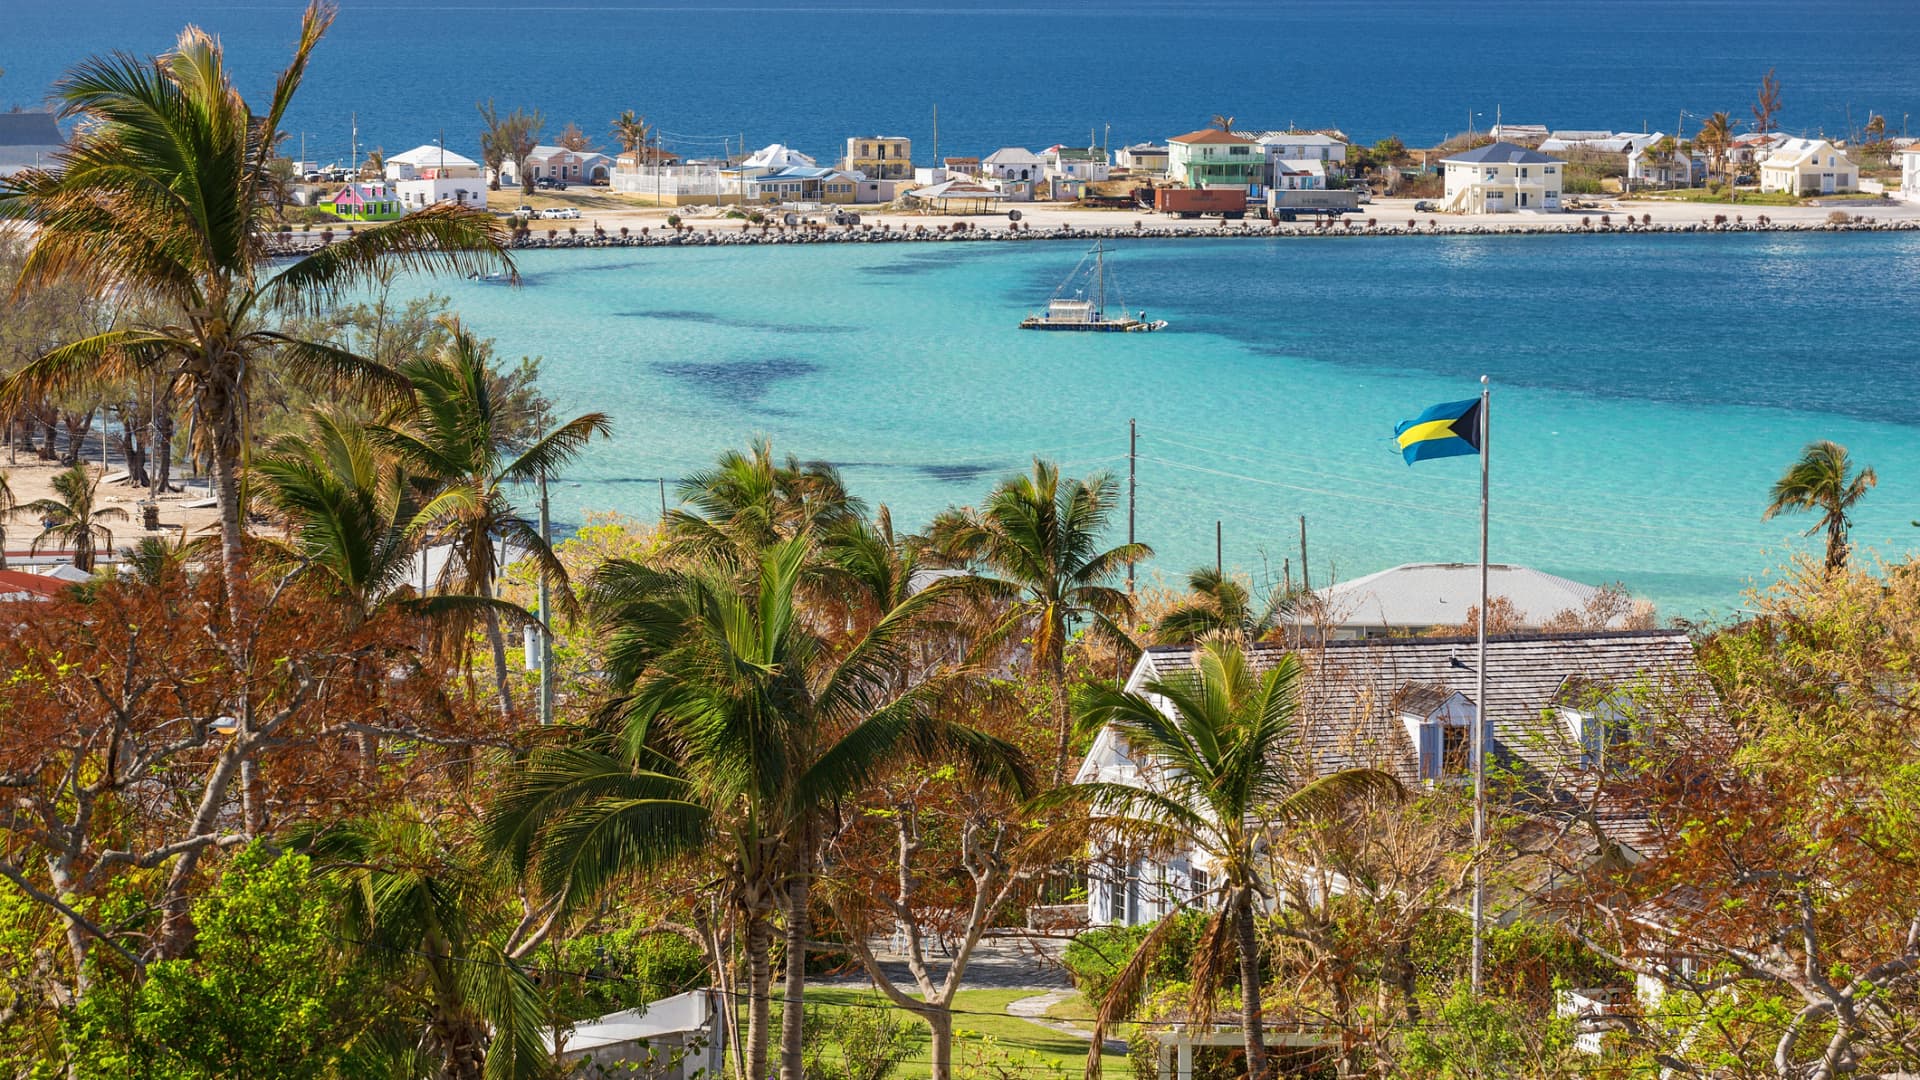 FTX spent $256 million on Bahamas real estate — now the island’s government wants it back